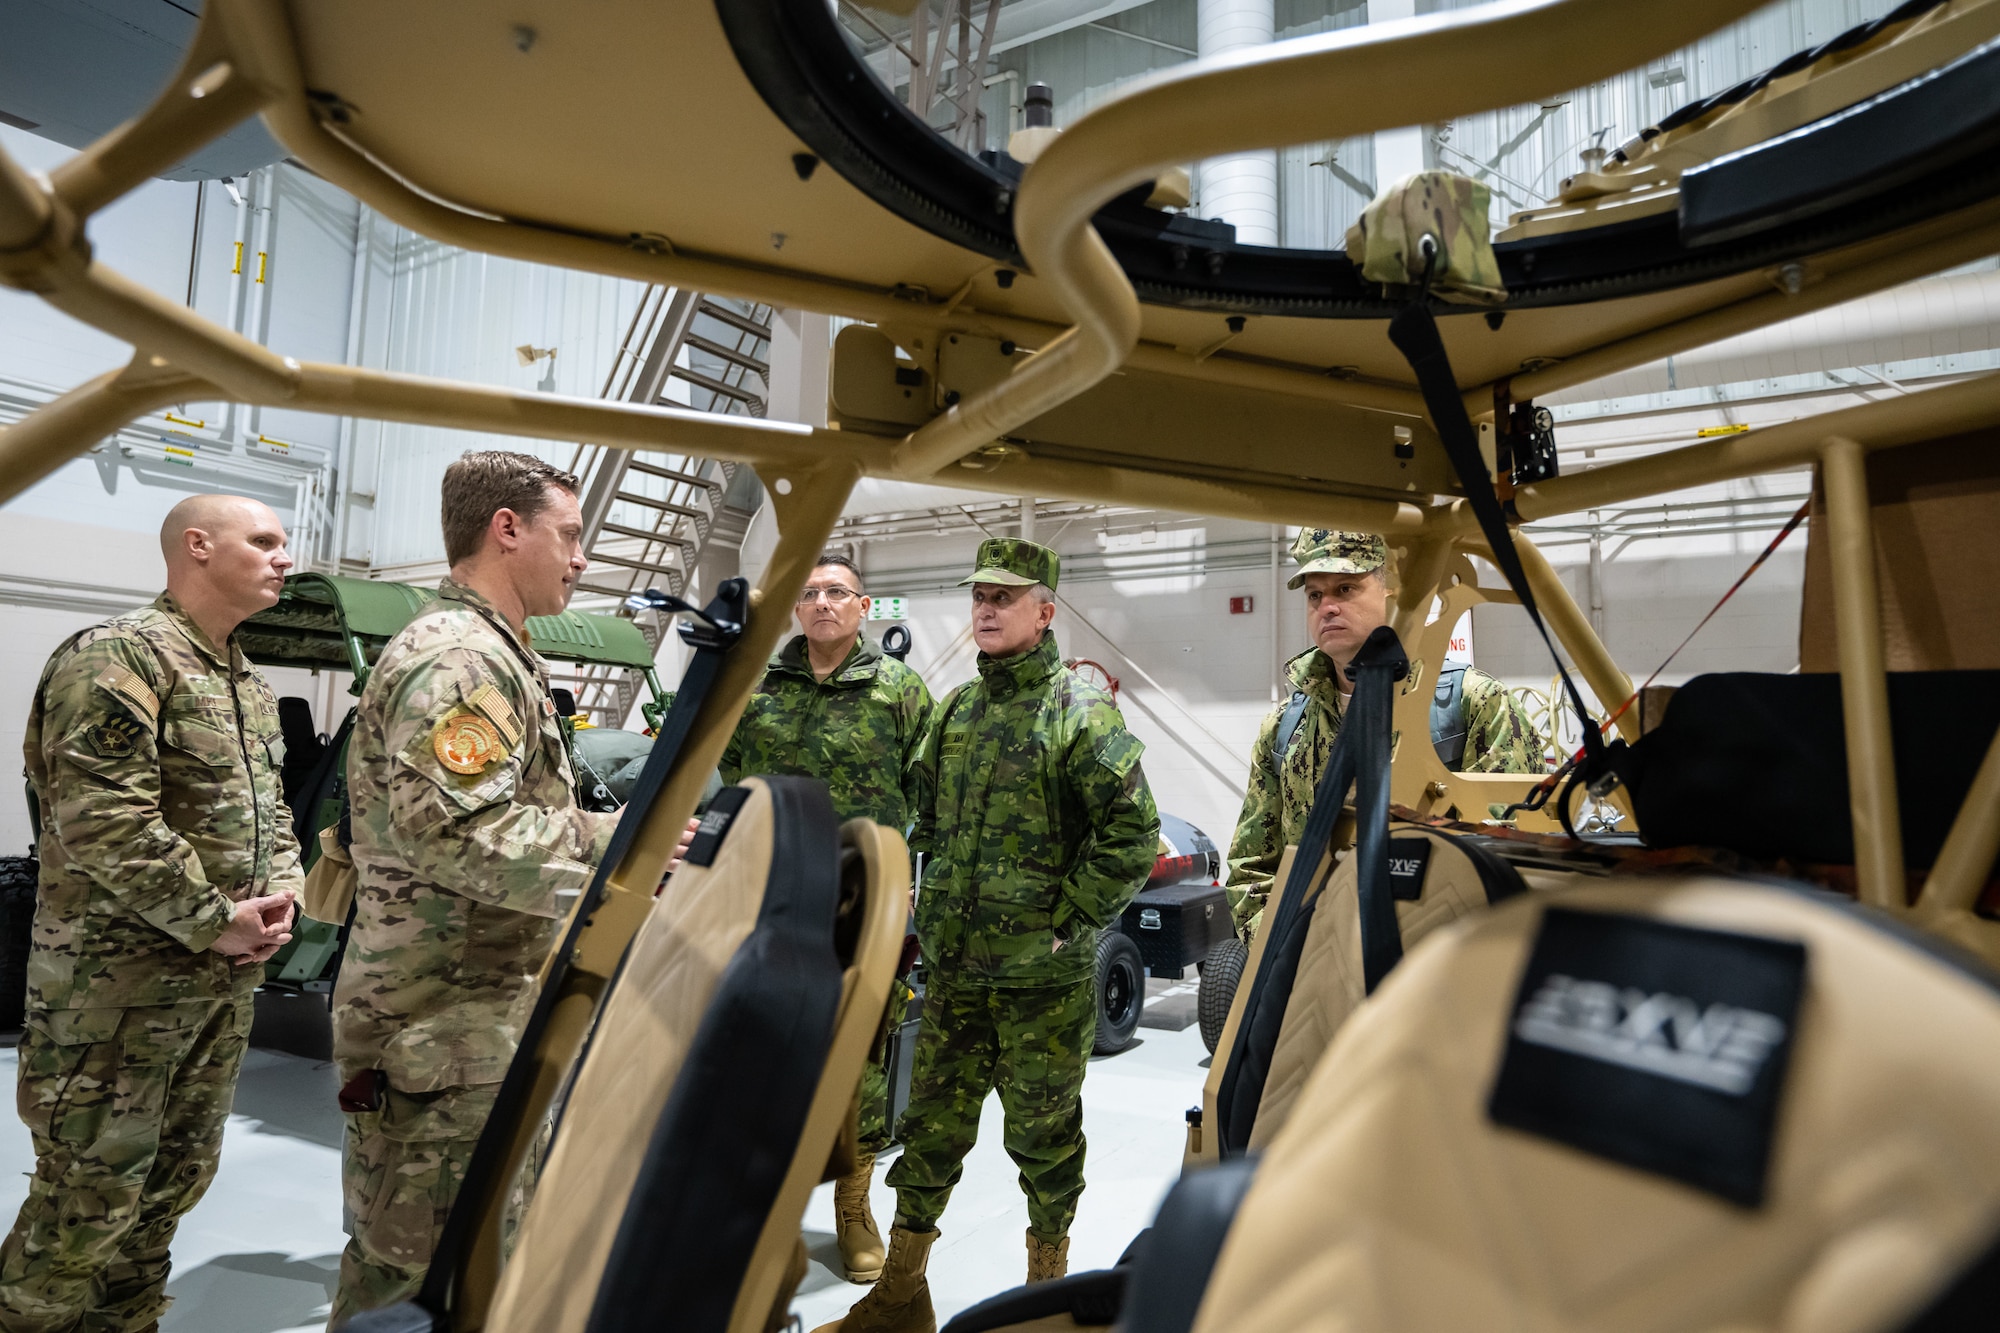 U.S. Air Force Senior Master Sgt. Blair Baerny, second from left, a pararescuman assigned to the Kentucky Air National Guard’s 123rd Special Tactics Squadron, discusses tactical vehicles with Ecuadorian military leaders at the Kentucky Air National Guard Base in Louisville, Ky., Jan. 31, 2024. The Ecuadorians are visiting this week to exchange information with the Kentucky National Guard as part of the State Partnership Program, a National Guard Bureau effort that pairs Guard units with foreign allies to foster enhanced understanding across all aspects of civil and military affairs. (U.S. Air National Guard photo by Dale Greer)